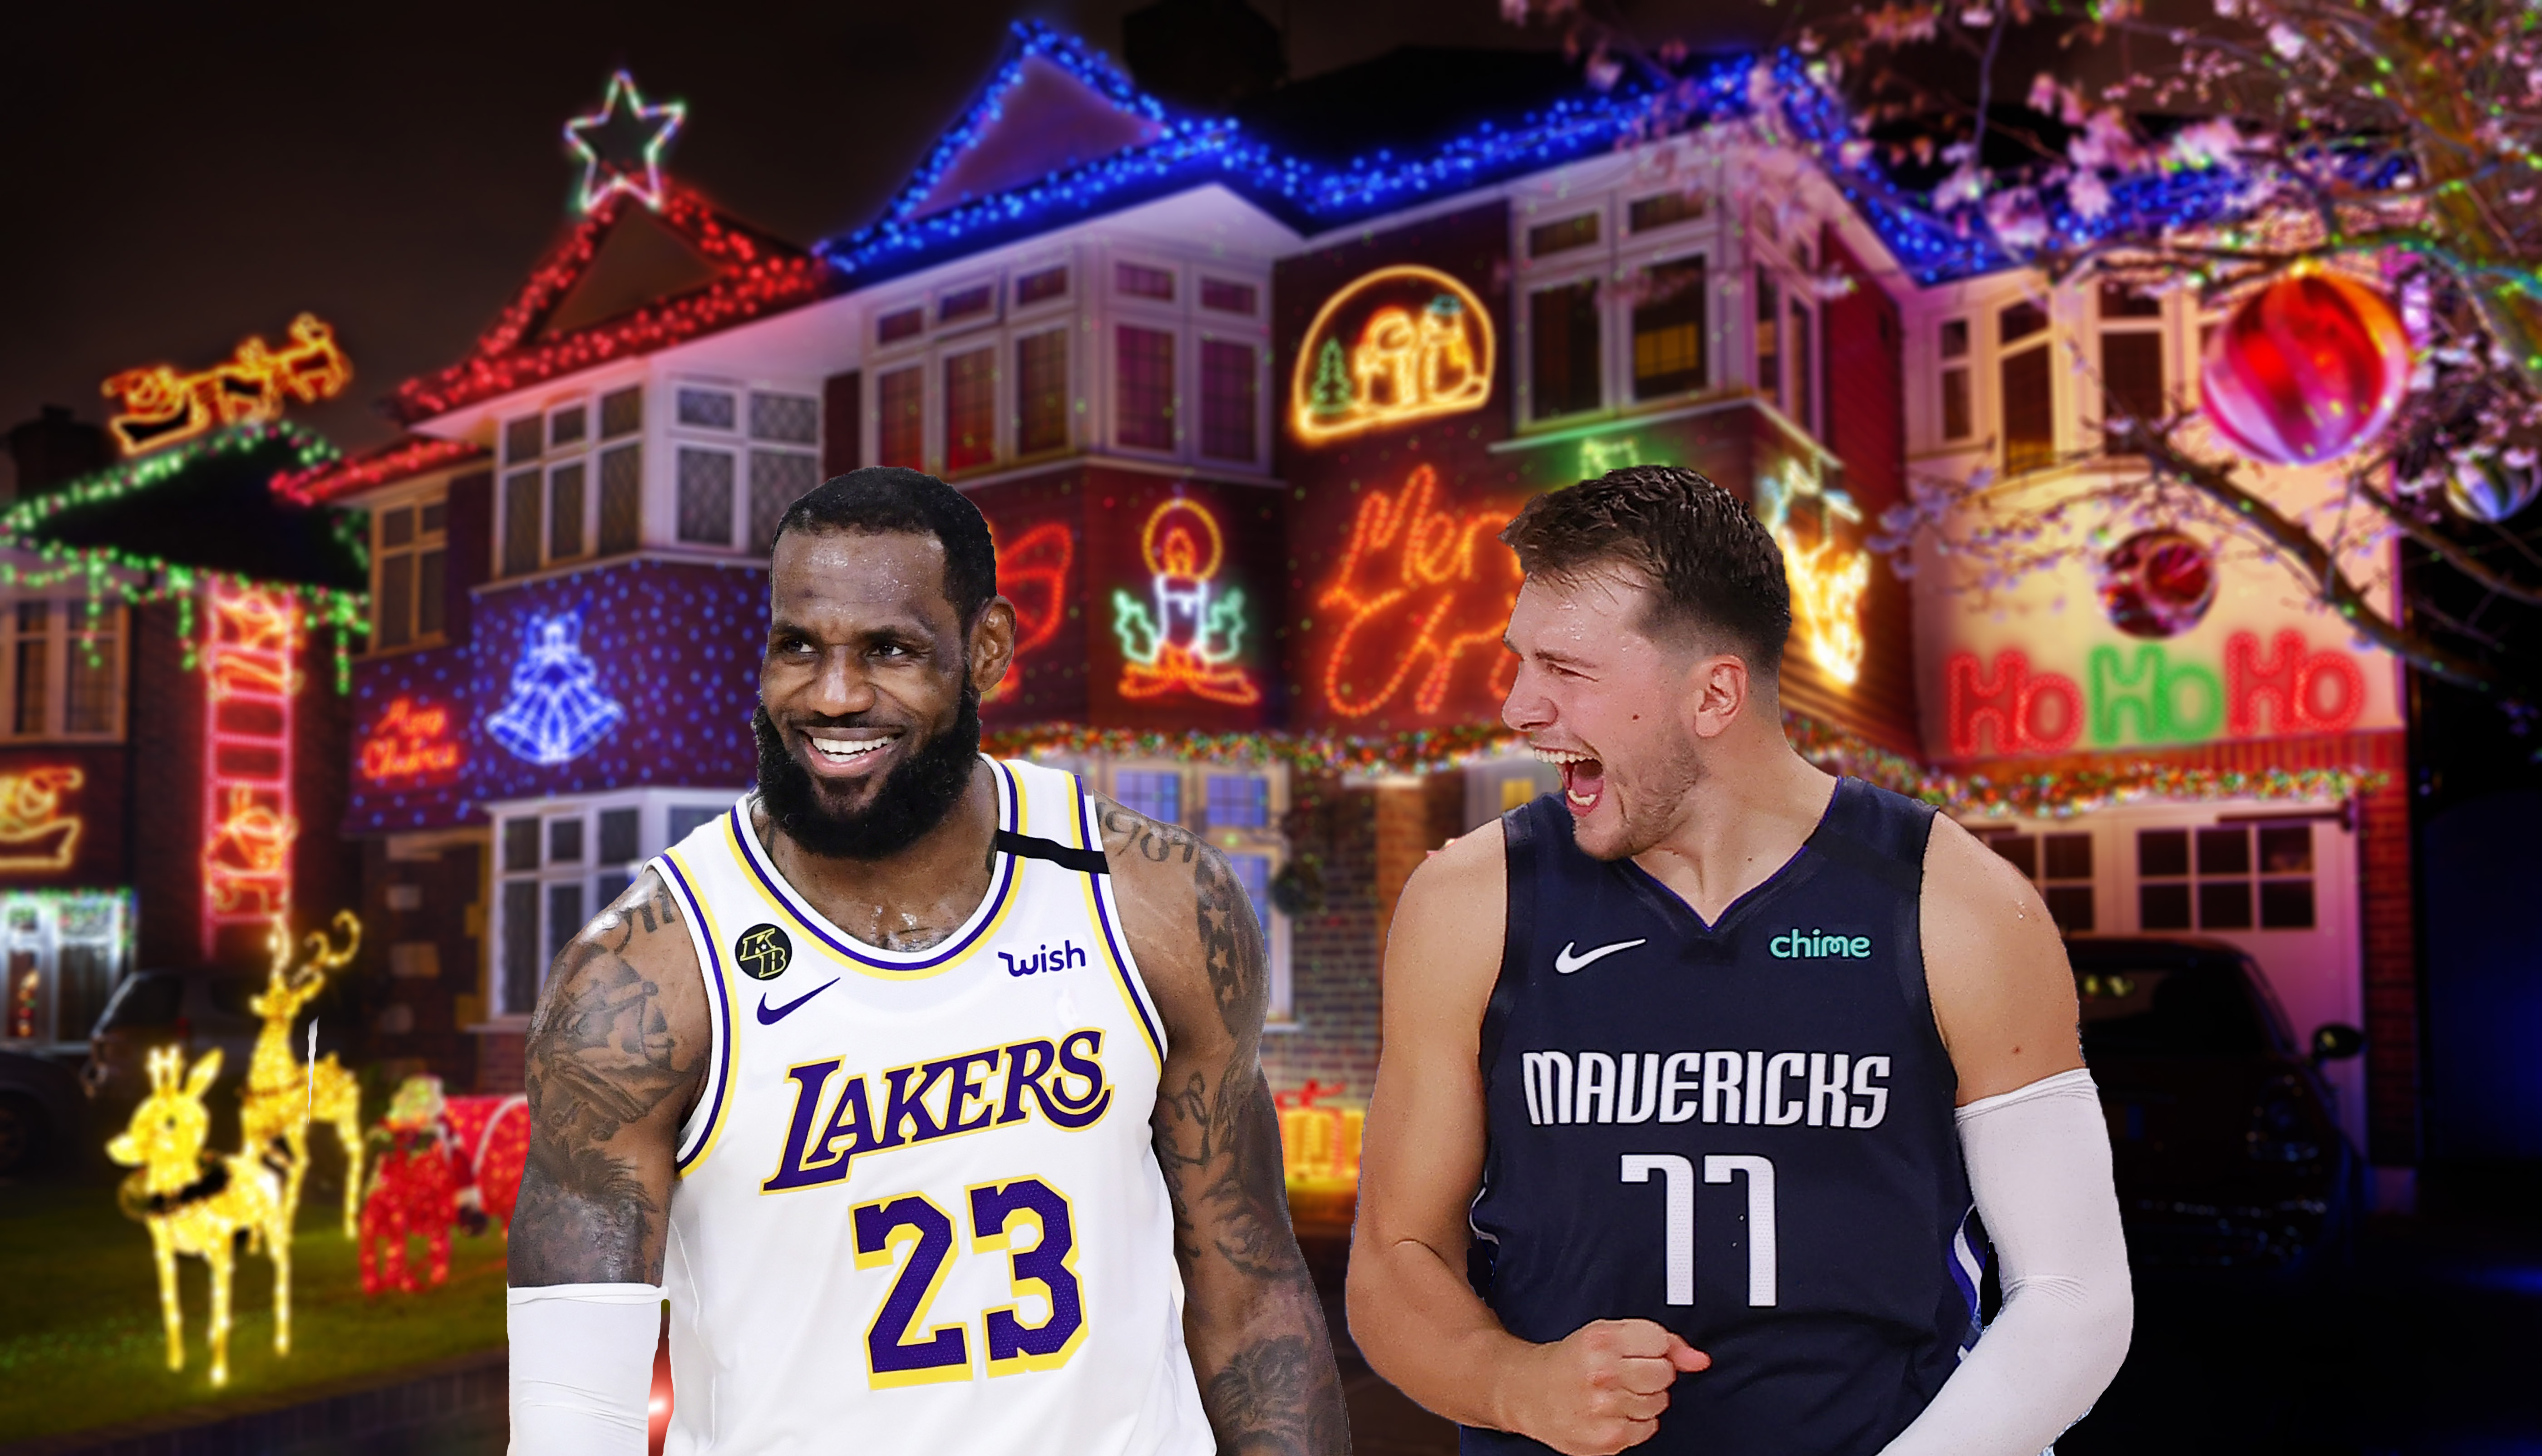 The NBA's Christmas Day schedule looks more lit than your